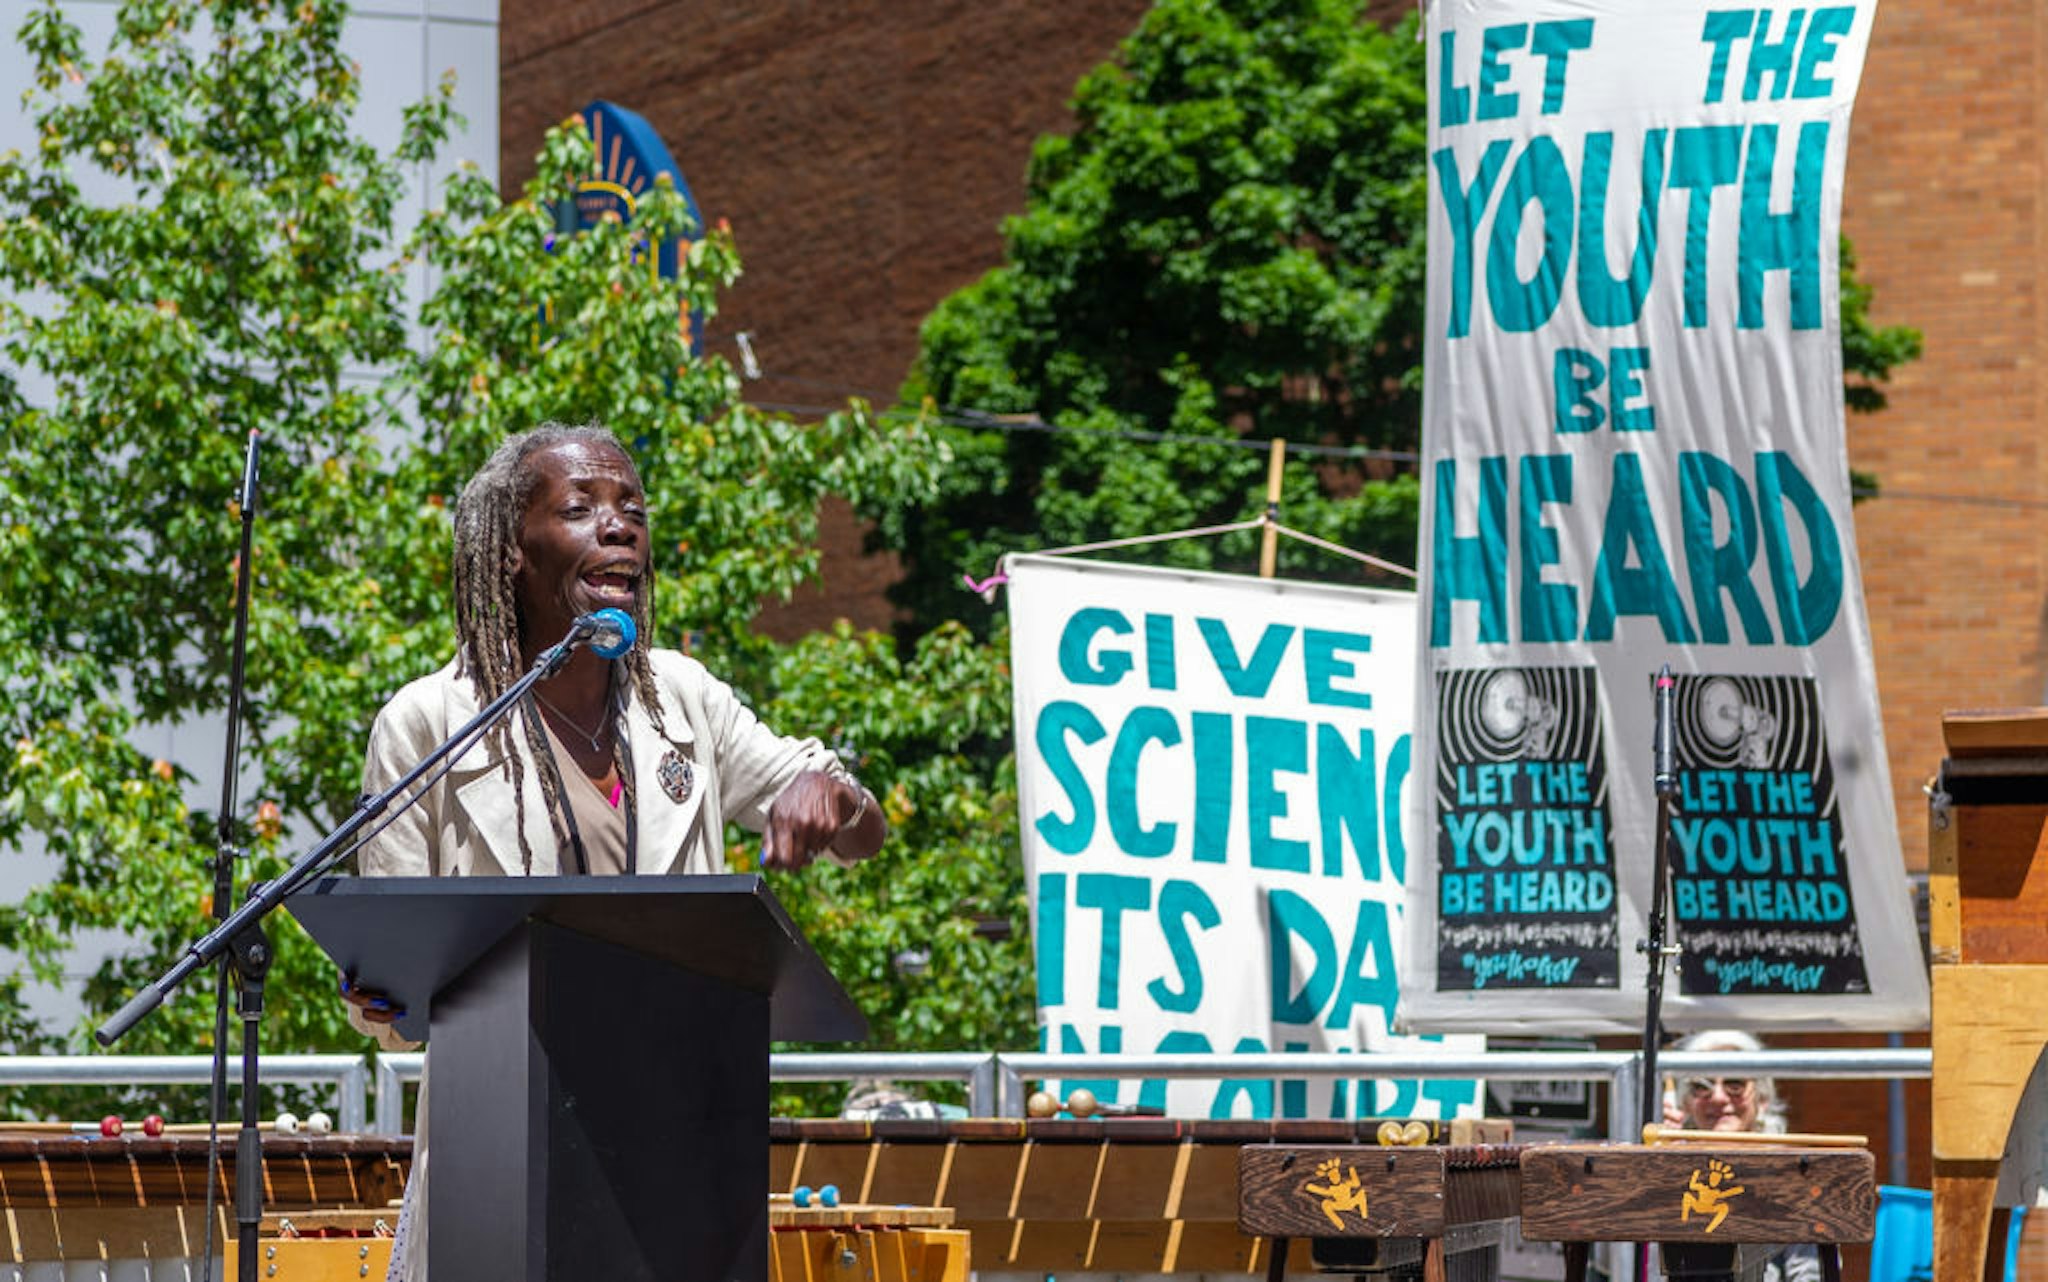 Portland City Commissioner Jo Ann Hardesty speaks the #youthvgov for the Right to a Livable Future in downtown Portland's Director Park on June 4, 2019. The rally supporting the lawsuit brought by Kelsey Juliana v United States at the Court of Appeals for the Ninth Circuit (Photos by Diego Diaz/Icon Sportswire).